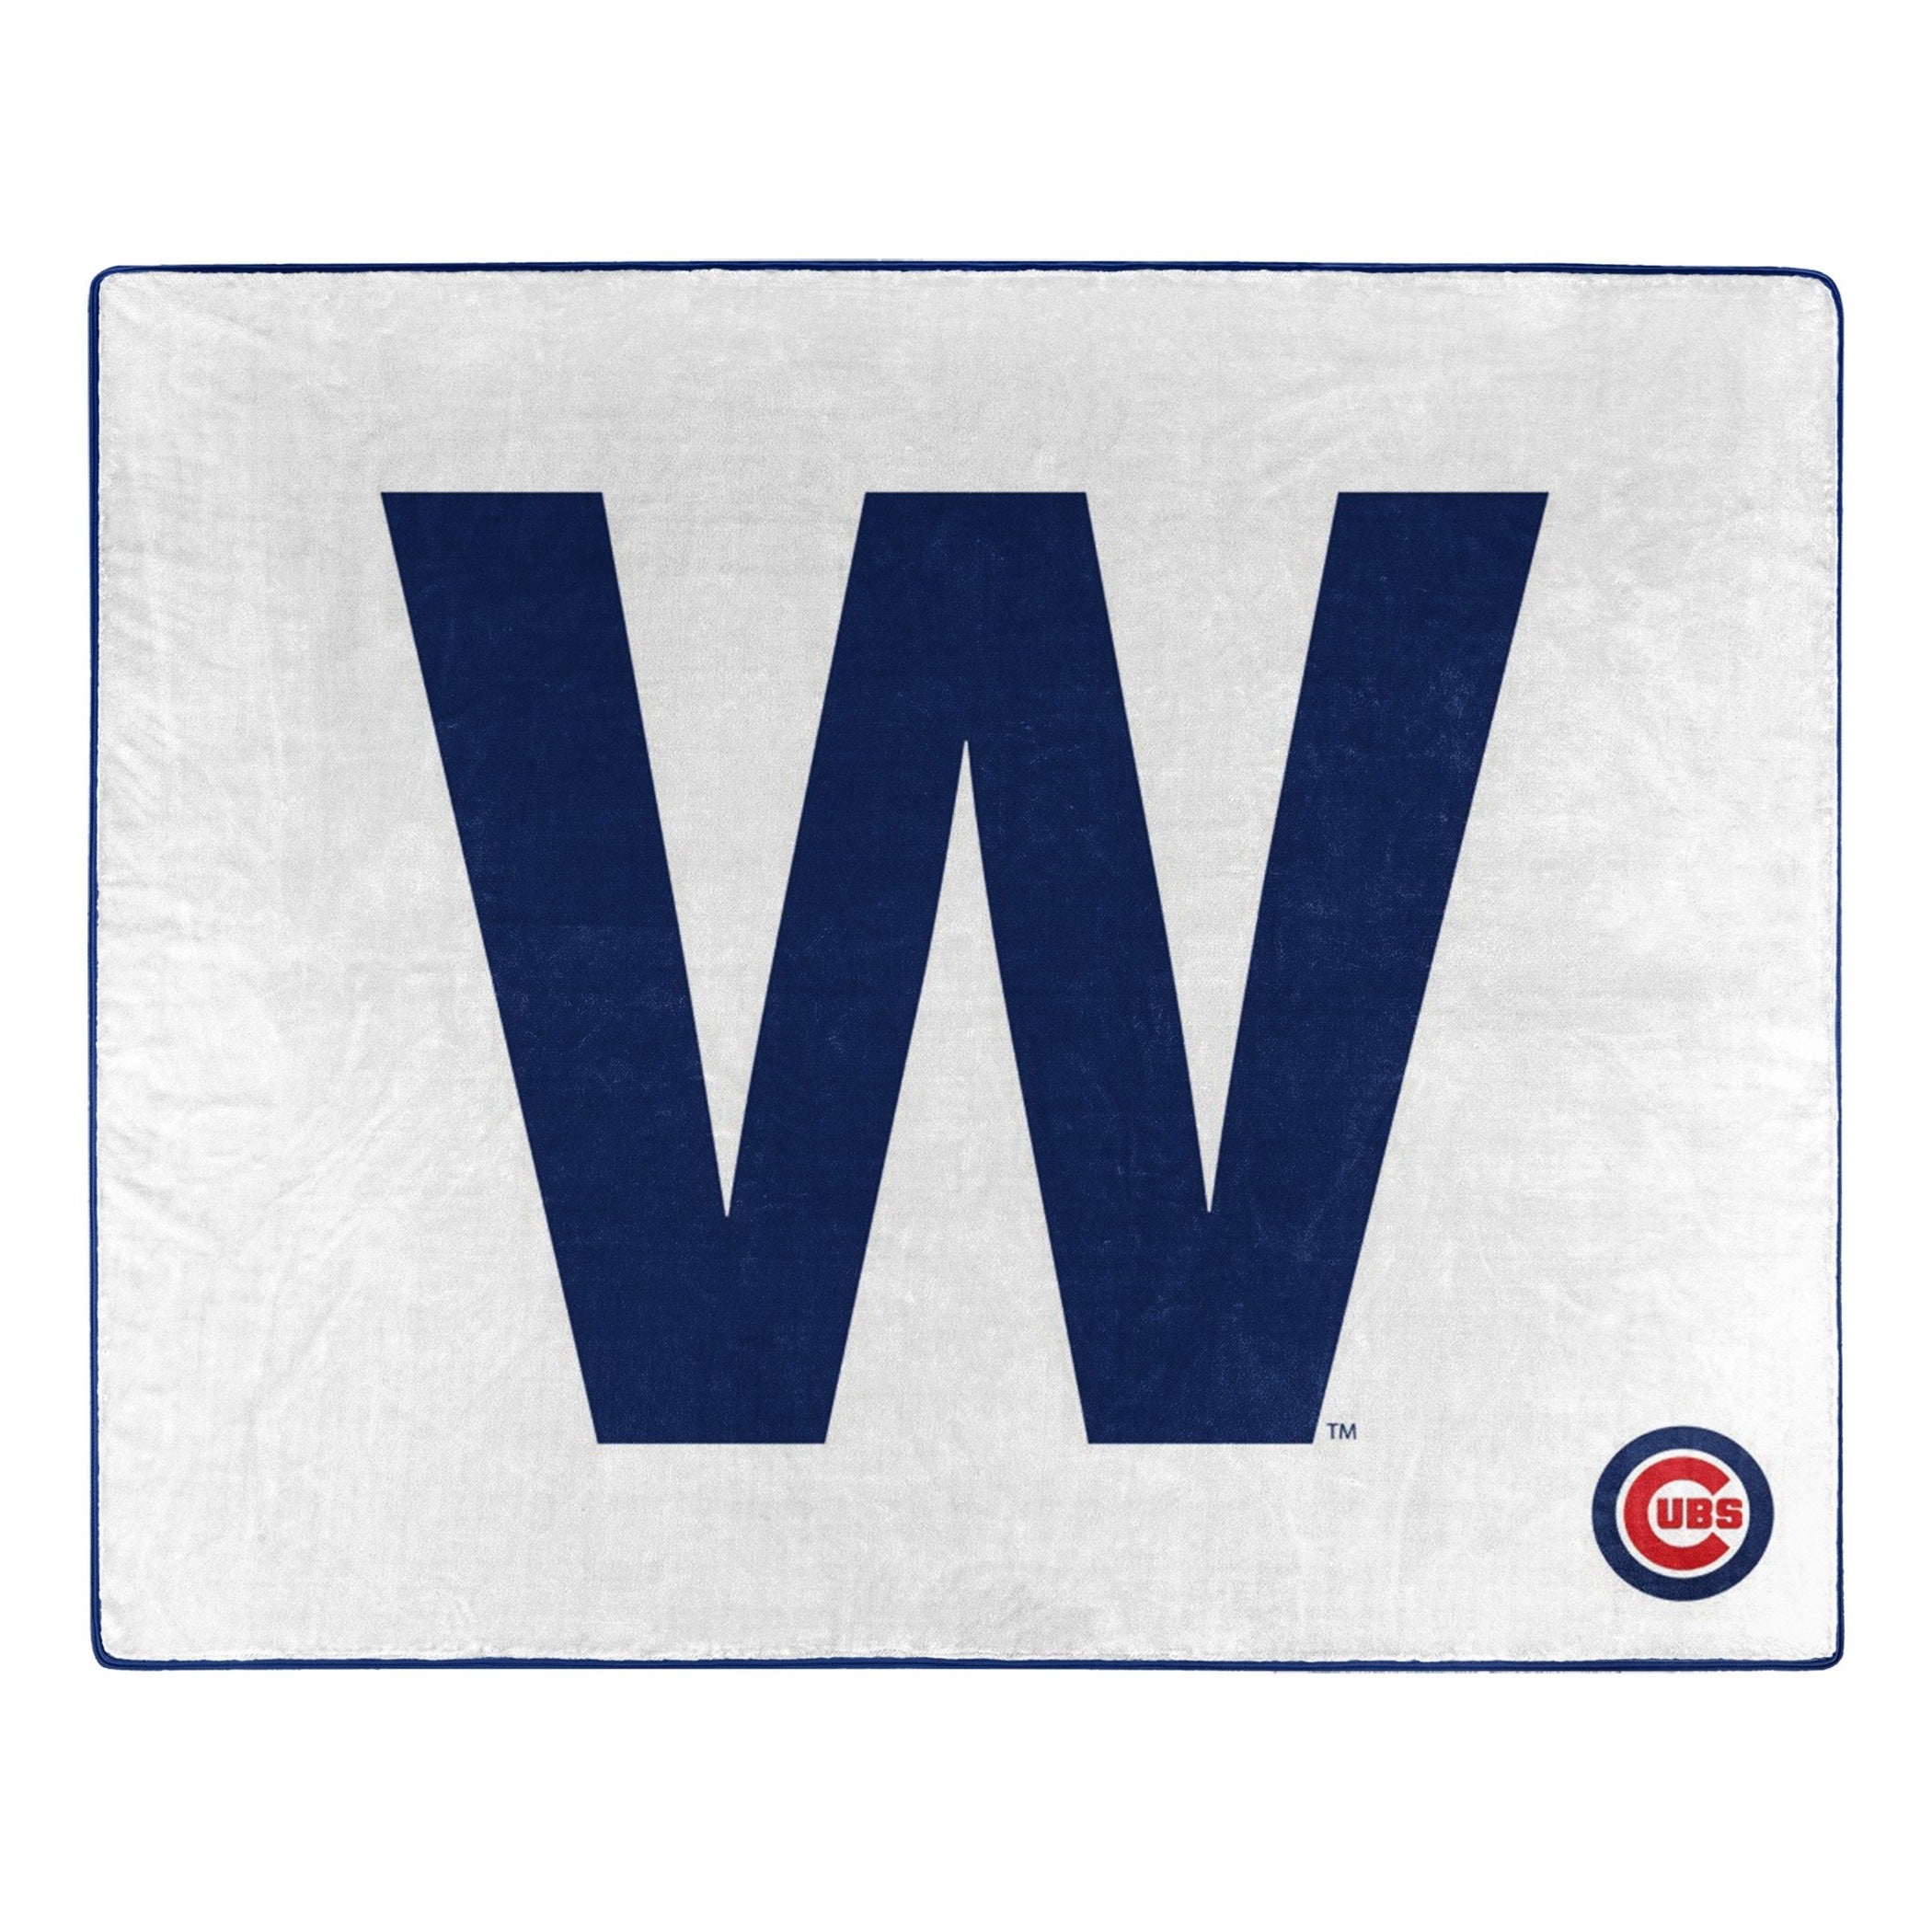 Northwest Co Chicago Cubs Baseball Wrigley Field Woven Tapestry Throw  Blanket